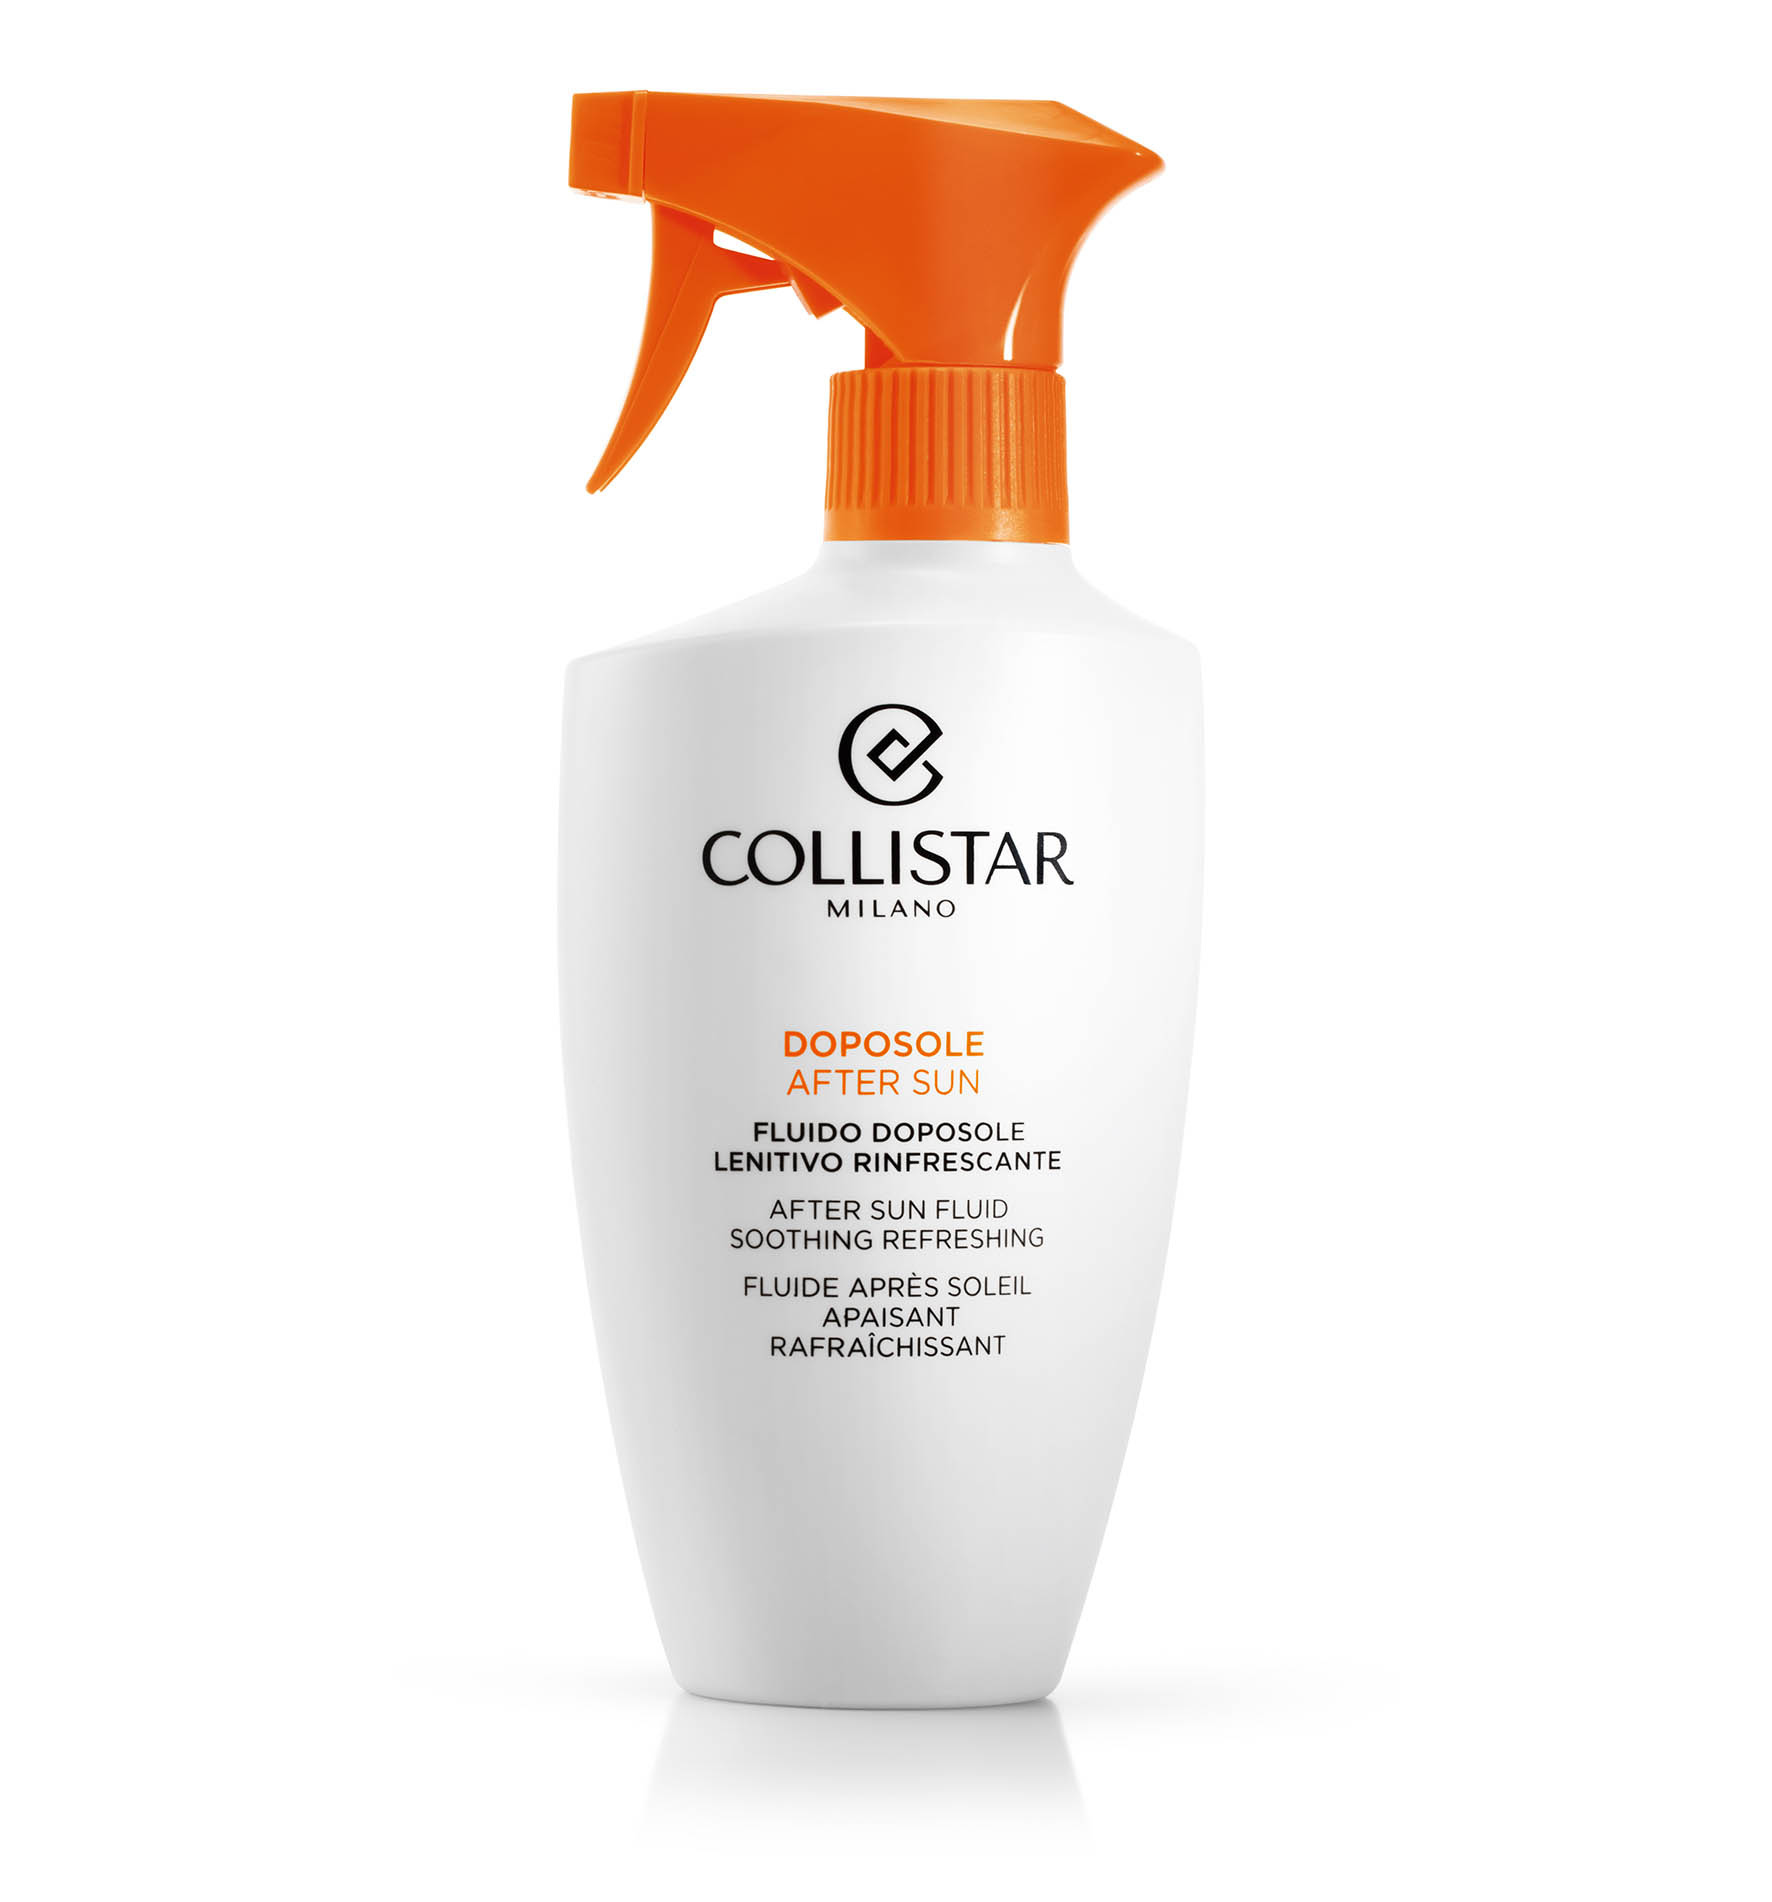 AFTER SUN FLUID SOOTHING REFRESHING - Doposole e Capelli | Collistar - Shop Online Ufficiale